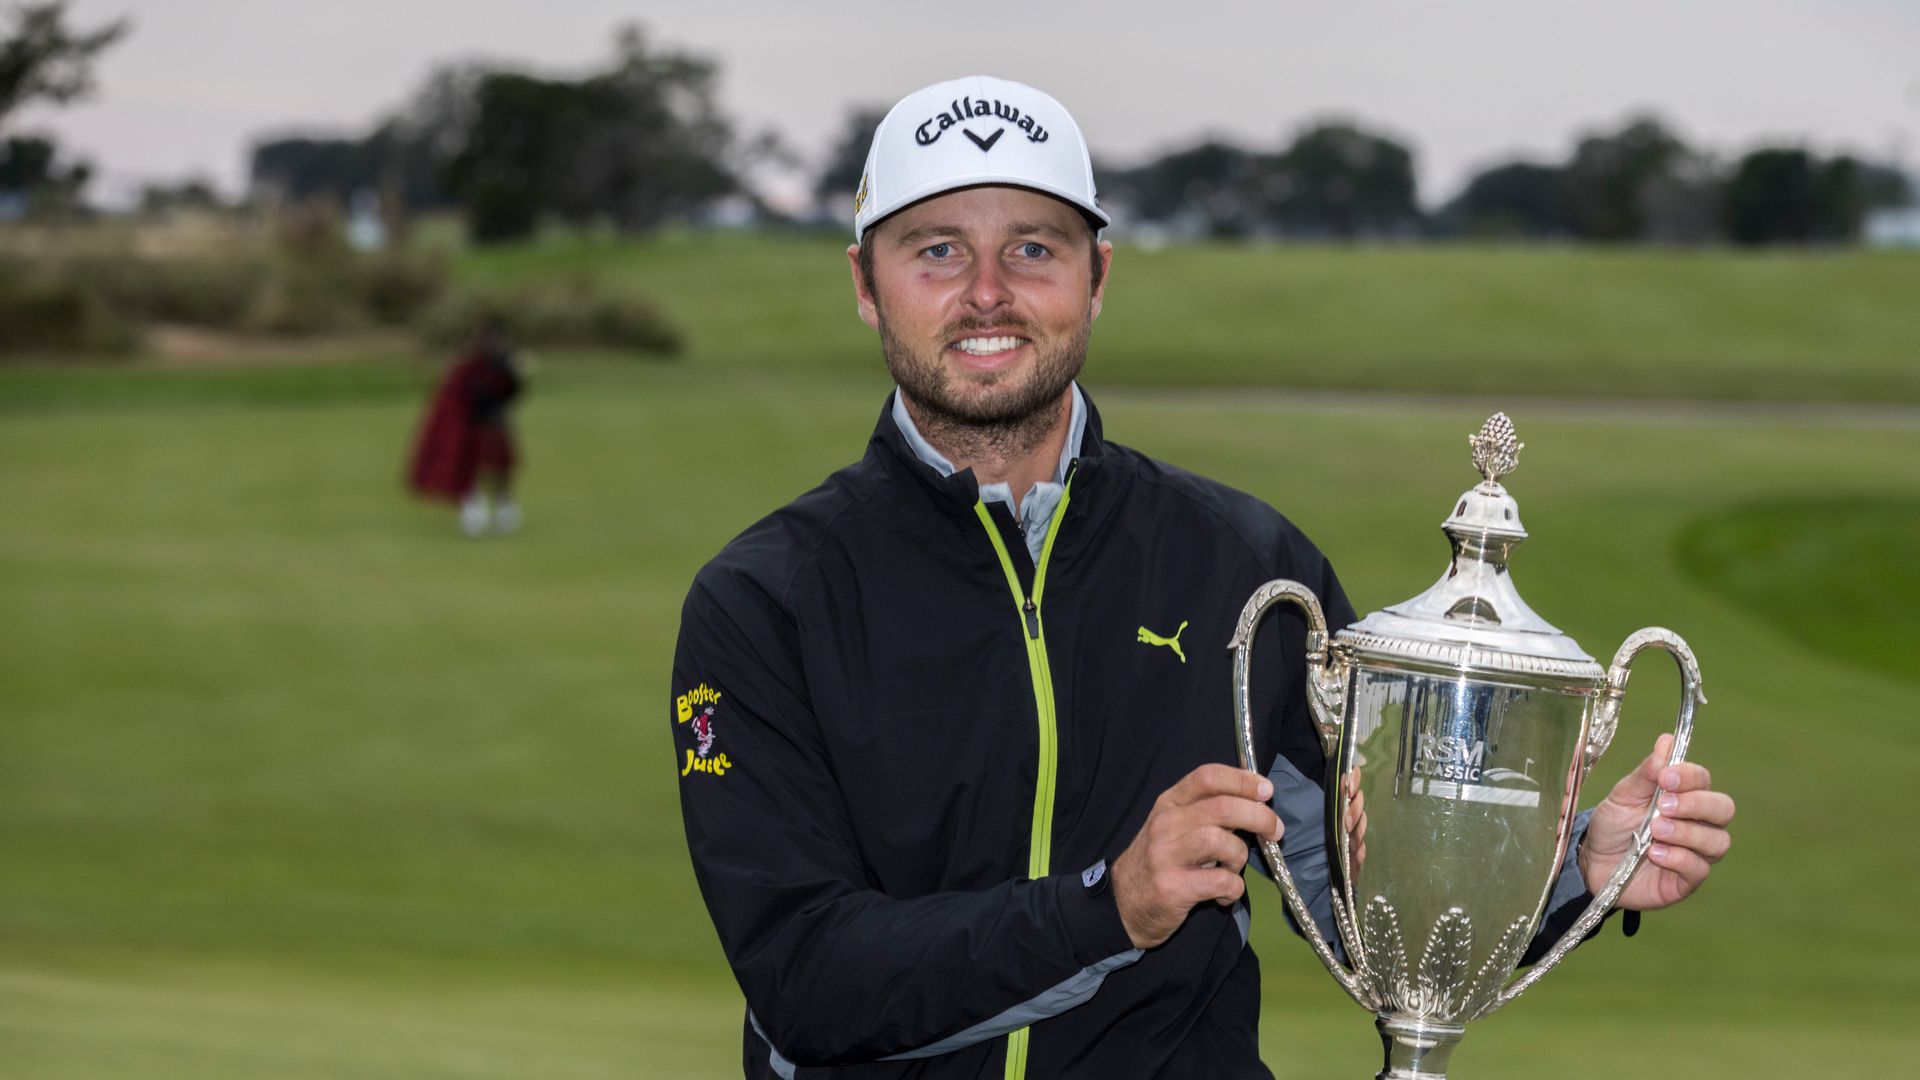 Svensson wins the RSM Classic for first PGA Tour title